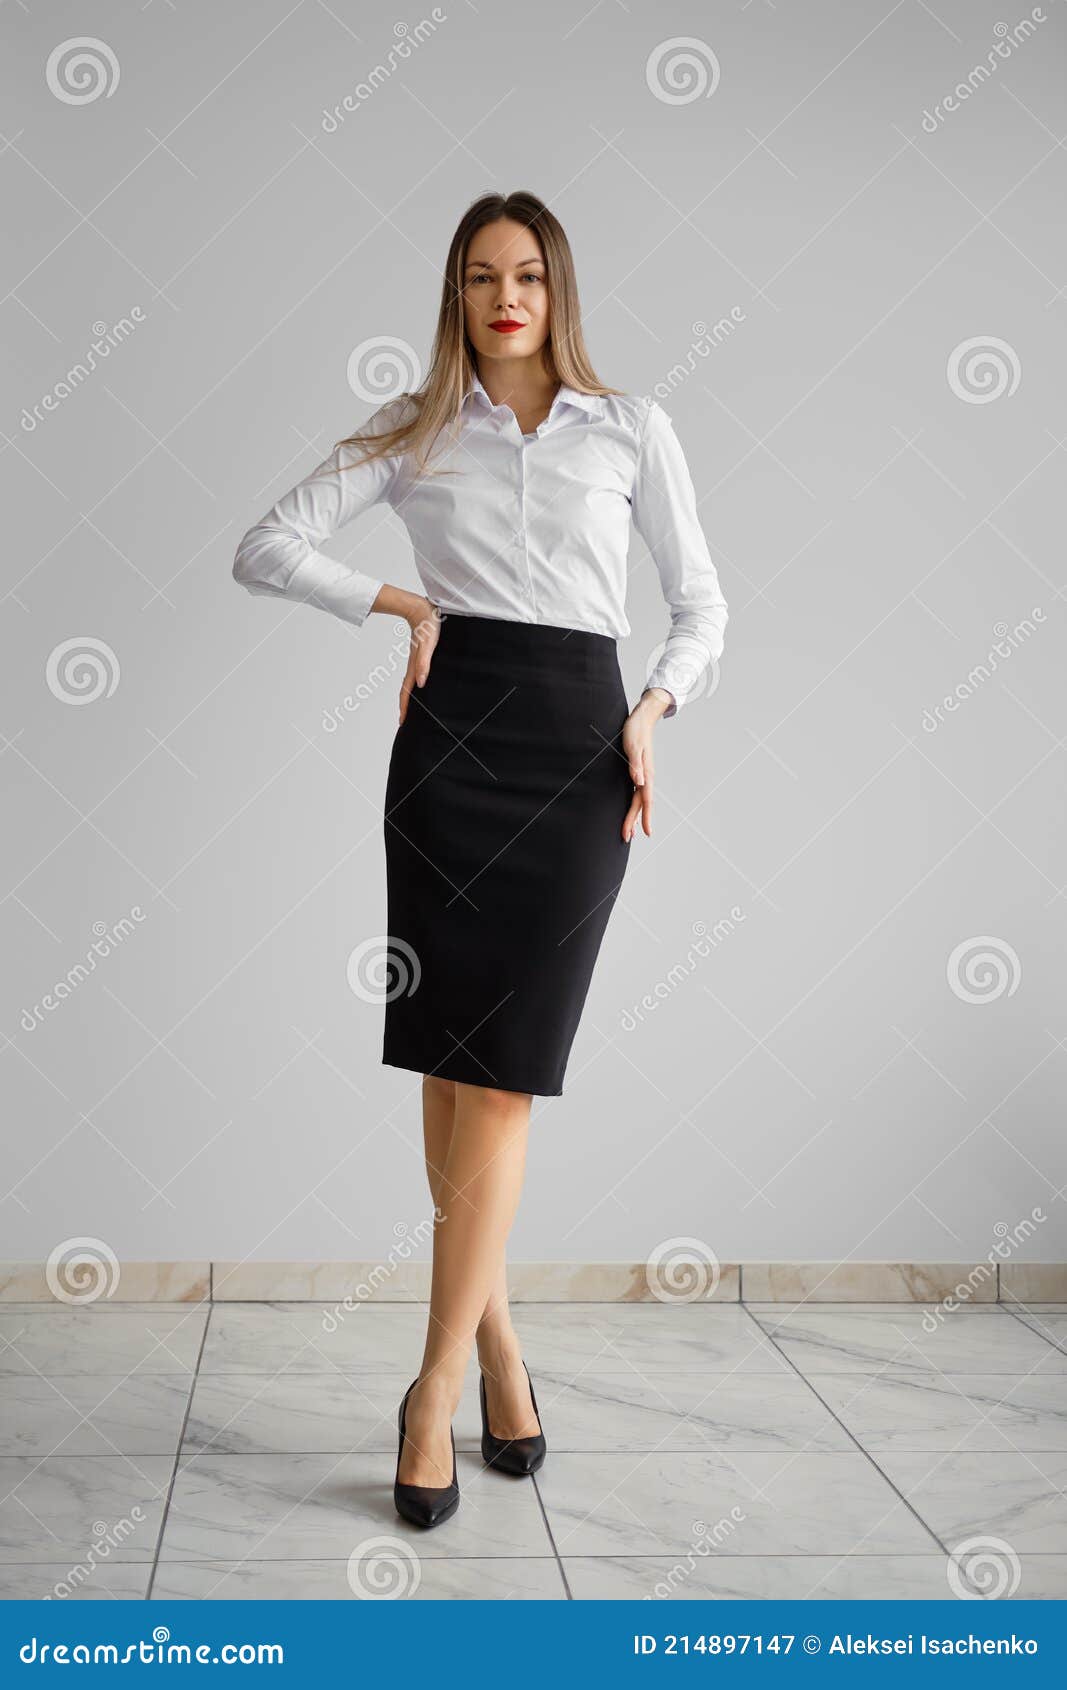 Office Dress Code - Pretty Girl in Whithe Shirt and Tight Black Skirt.  Stock Image - Image of shirt, standing: 214897147